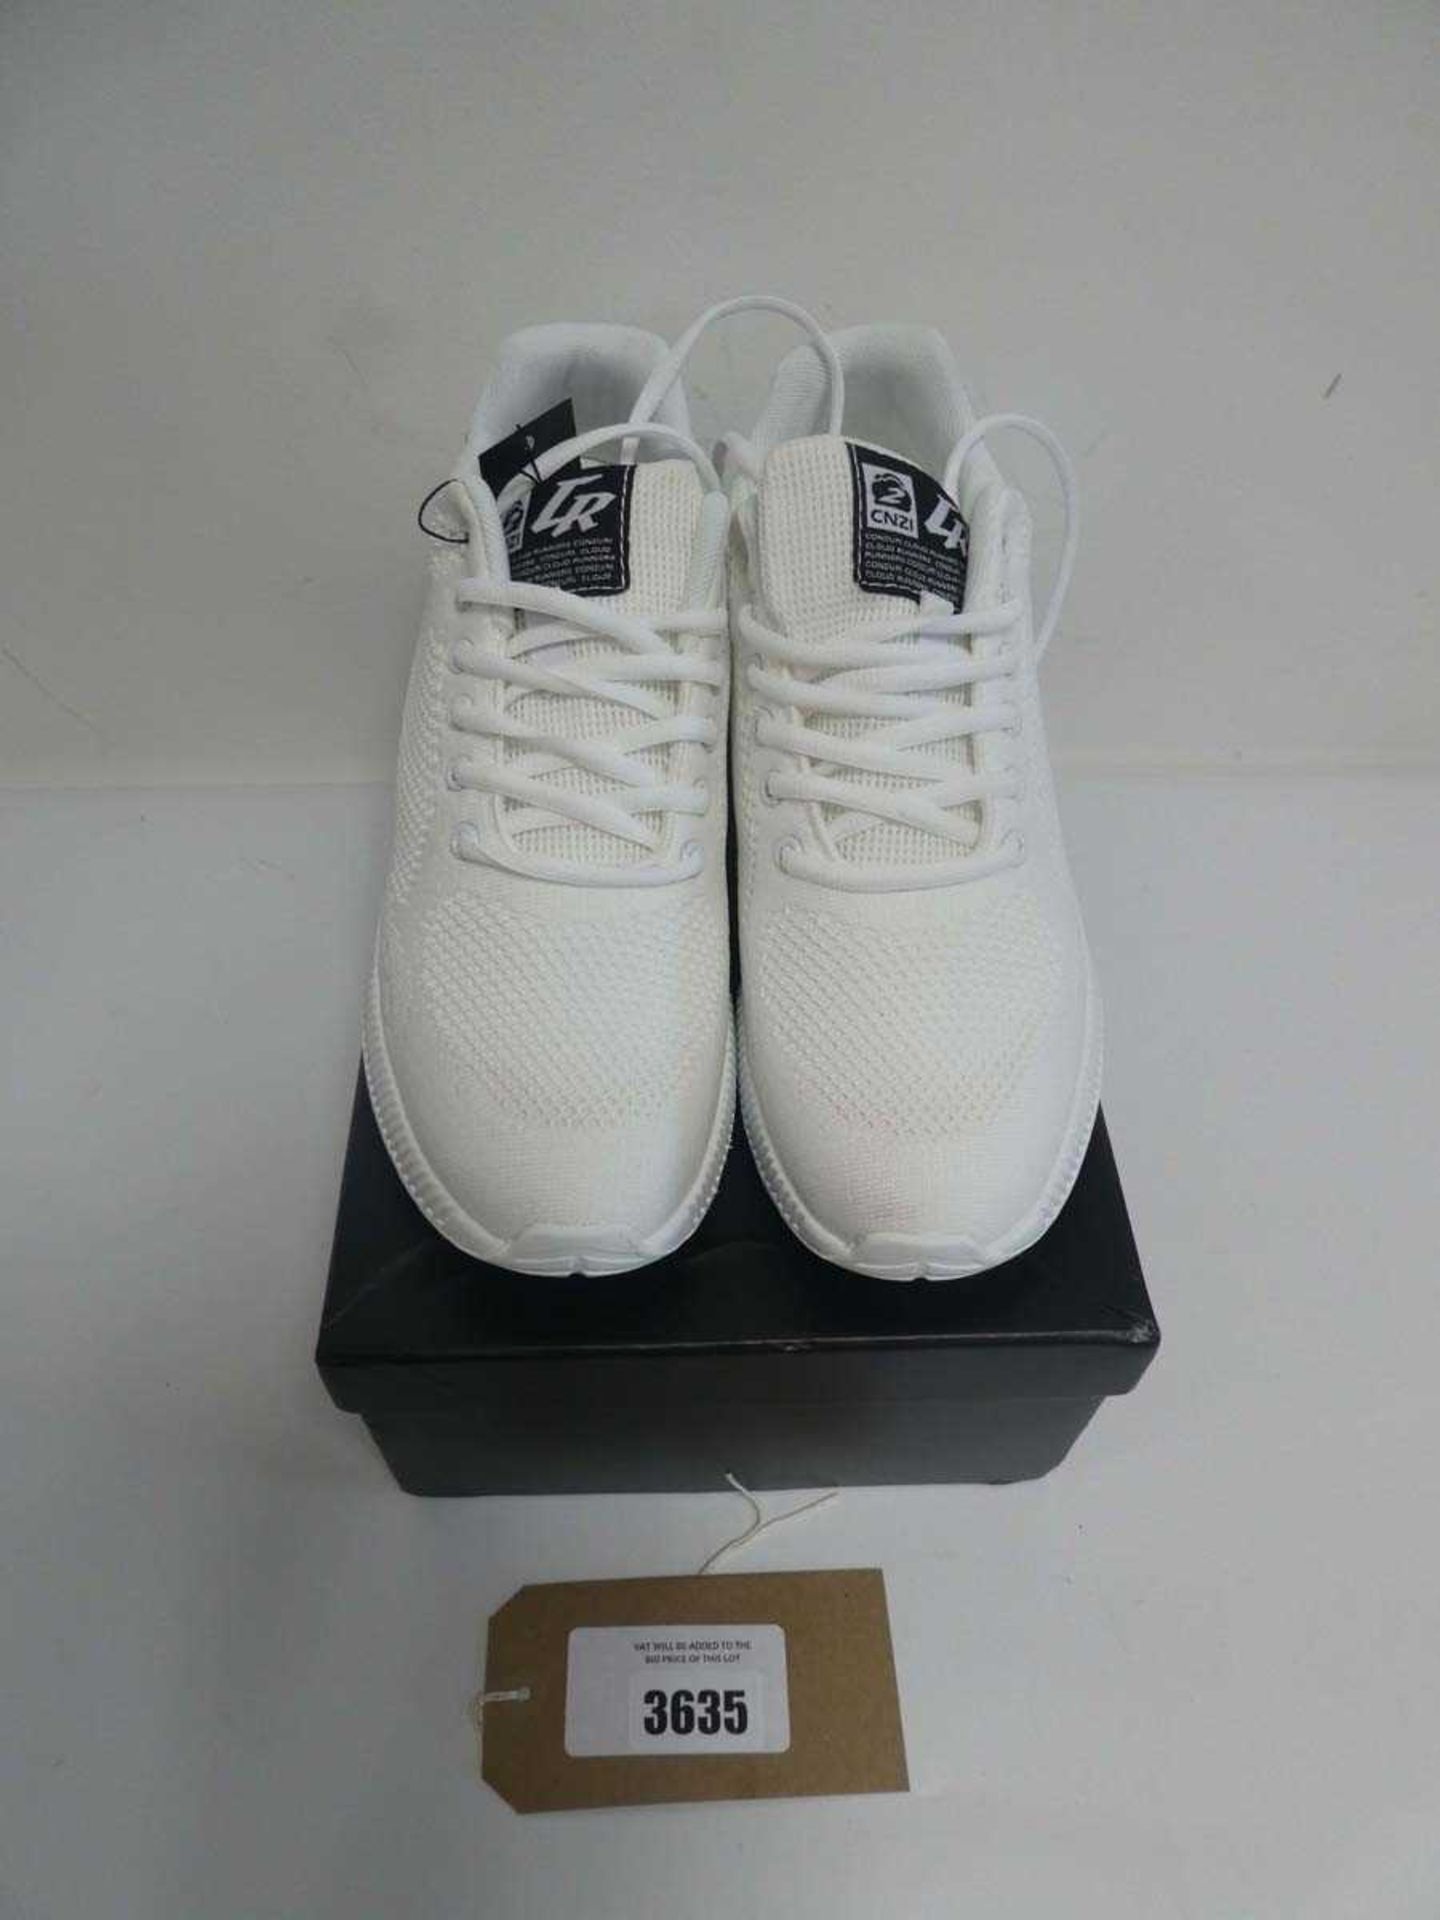 +VAT Conzuri trainers in white size UK8.5 (boxed)